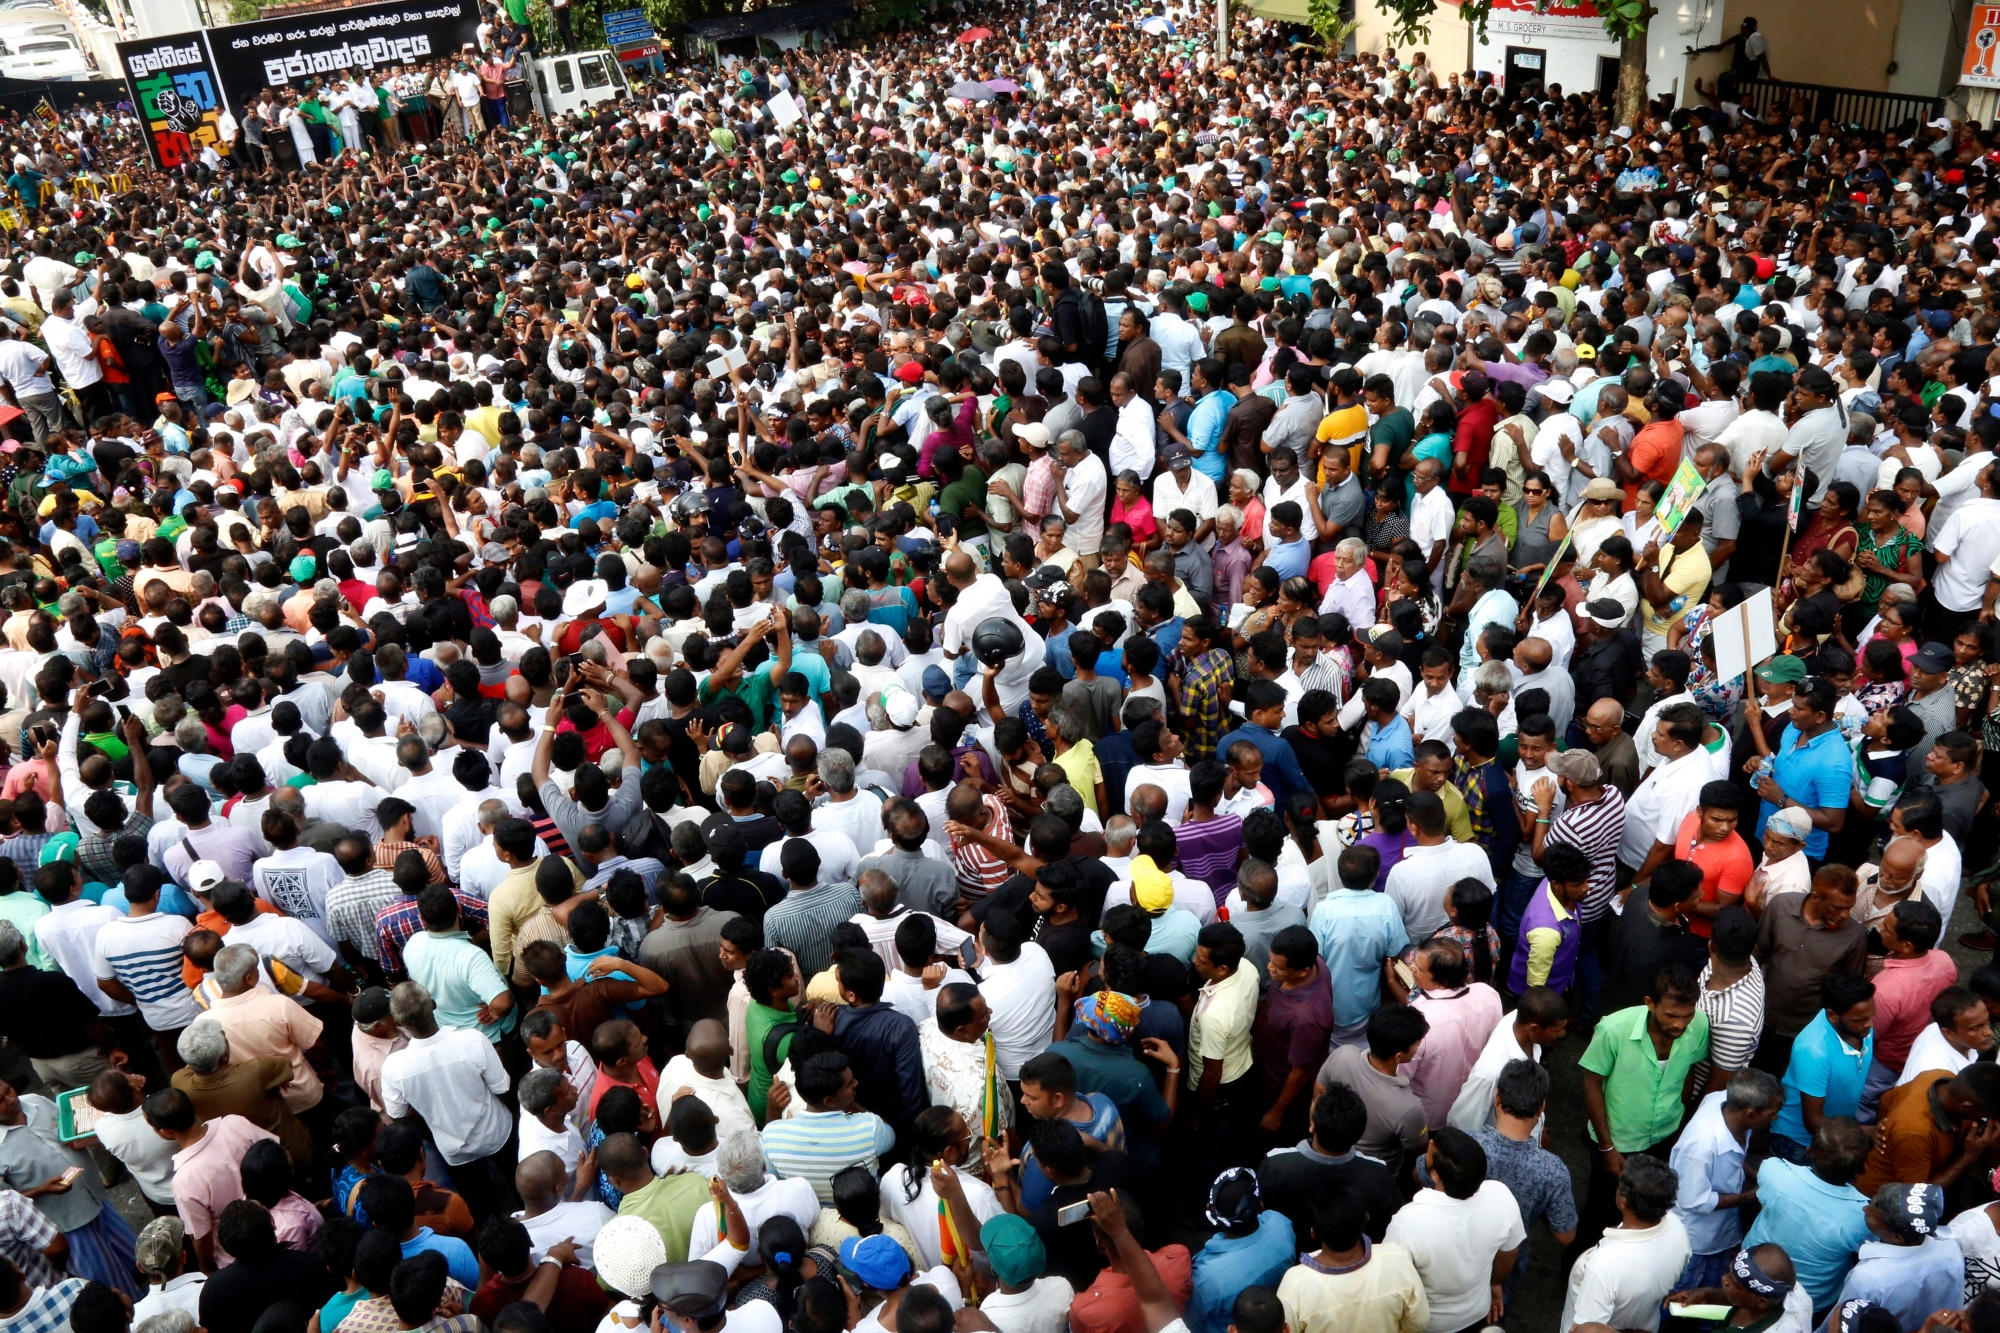 epa07131535 A view of a section of supporters of United National Party (UNP) leader Ranil Wickremesinghe taking part in a rally near the Prime Ministerial residence of the 'Temple Trees' in Colombo, Sri Lanka, 30 October 2018. Sri Lankan President Maithripala Sirisena appointed Mahinda Rajapaksa as the new Prime Minister after removing Ranil Wickremesinghe from the post on 26 October night. Ousted premier Wickremesinghe claims that constitutionally he still retains the post of Prime Minister refusing to leave the official Prime Ministerial residence of the 'Temple Trees.' Thousands of demonstrators took part in the rally, organized in solidarity with Wickremesinghe, to show what the UNP claimed to be as the 'people's power.' Meanwhile, 12 Ministers, a Deputy Minister and two State Ministers, including five from the UNP have already taken oaths under the government of newly appointed Prime Minister Rajapaksa.  EPA/M.A.PUSHPA KUMARA SRI LANKA POLITICS CRISIS